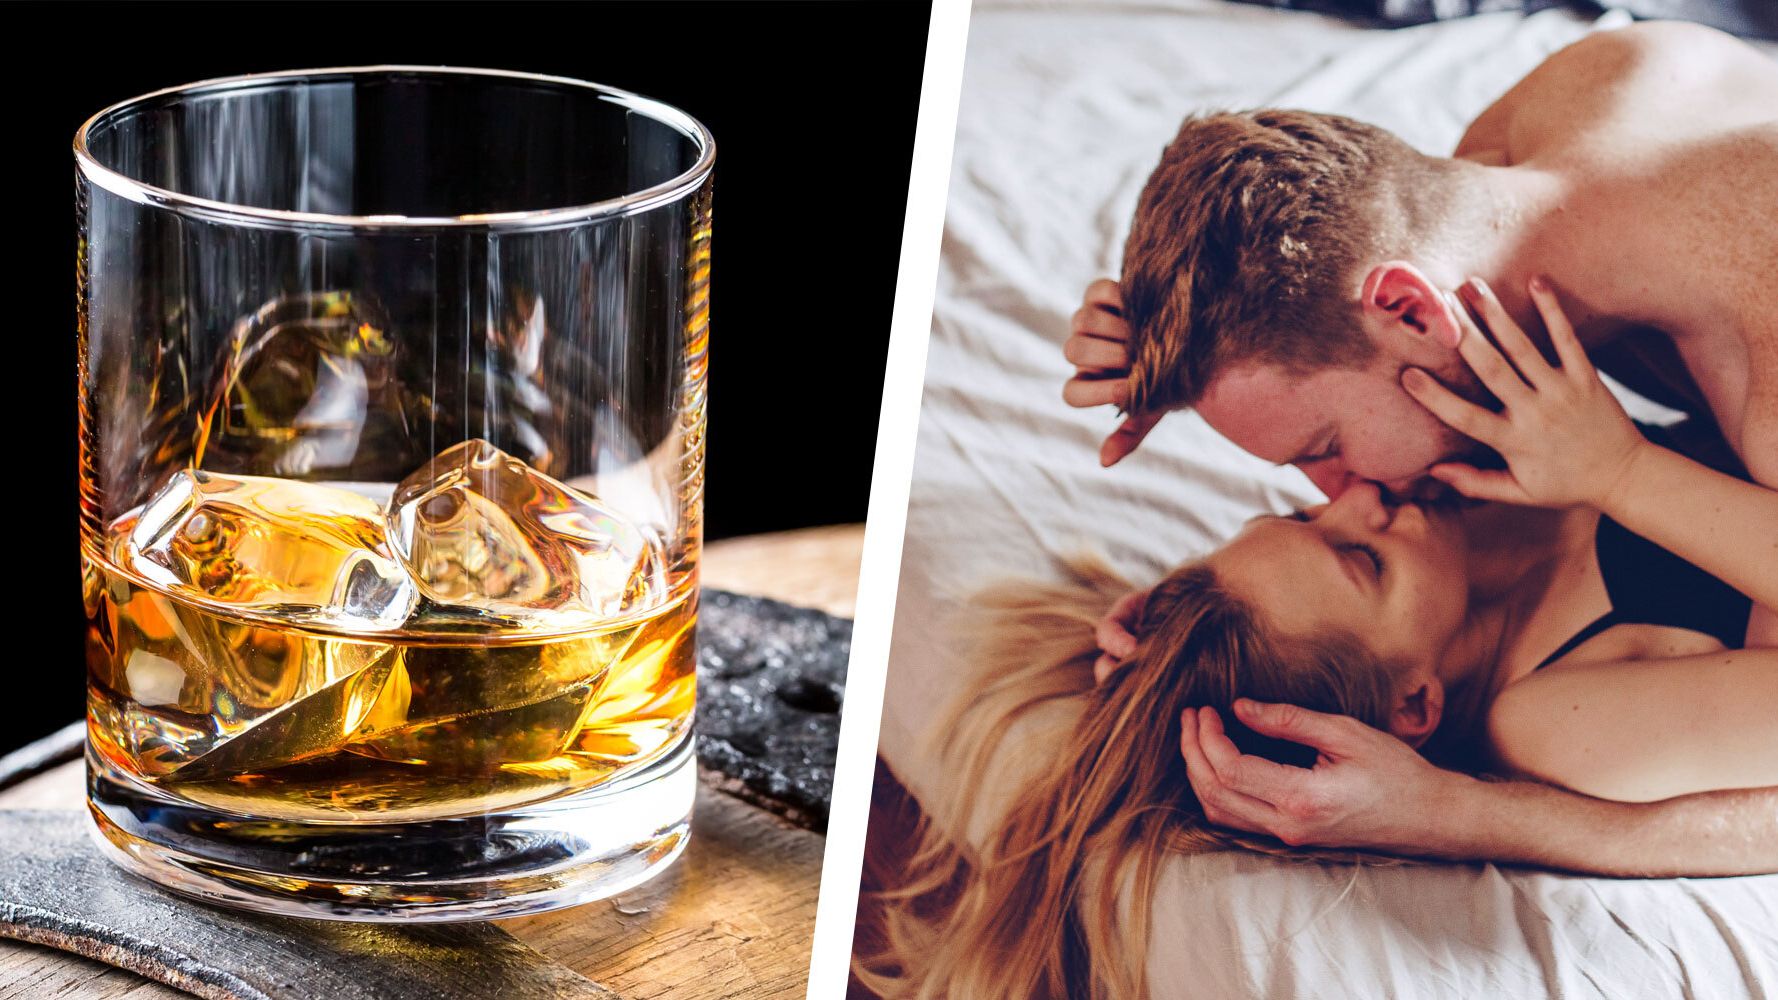 Drunk Party Girls Sucking Cock - Whiskey Dick Is Real. Here's the Science Behind It.